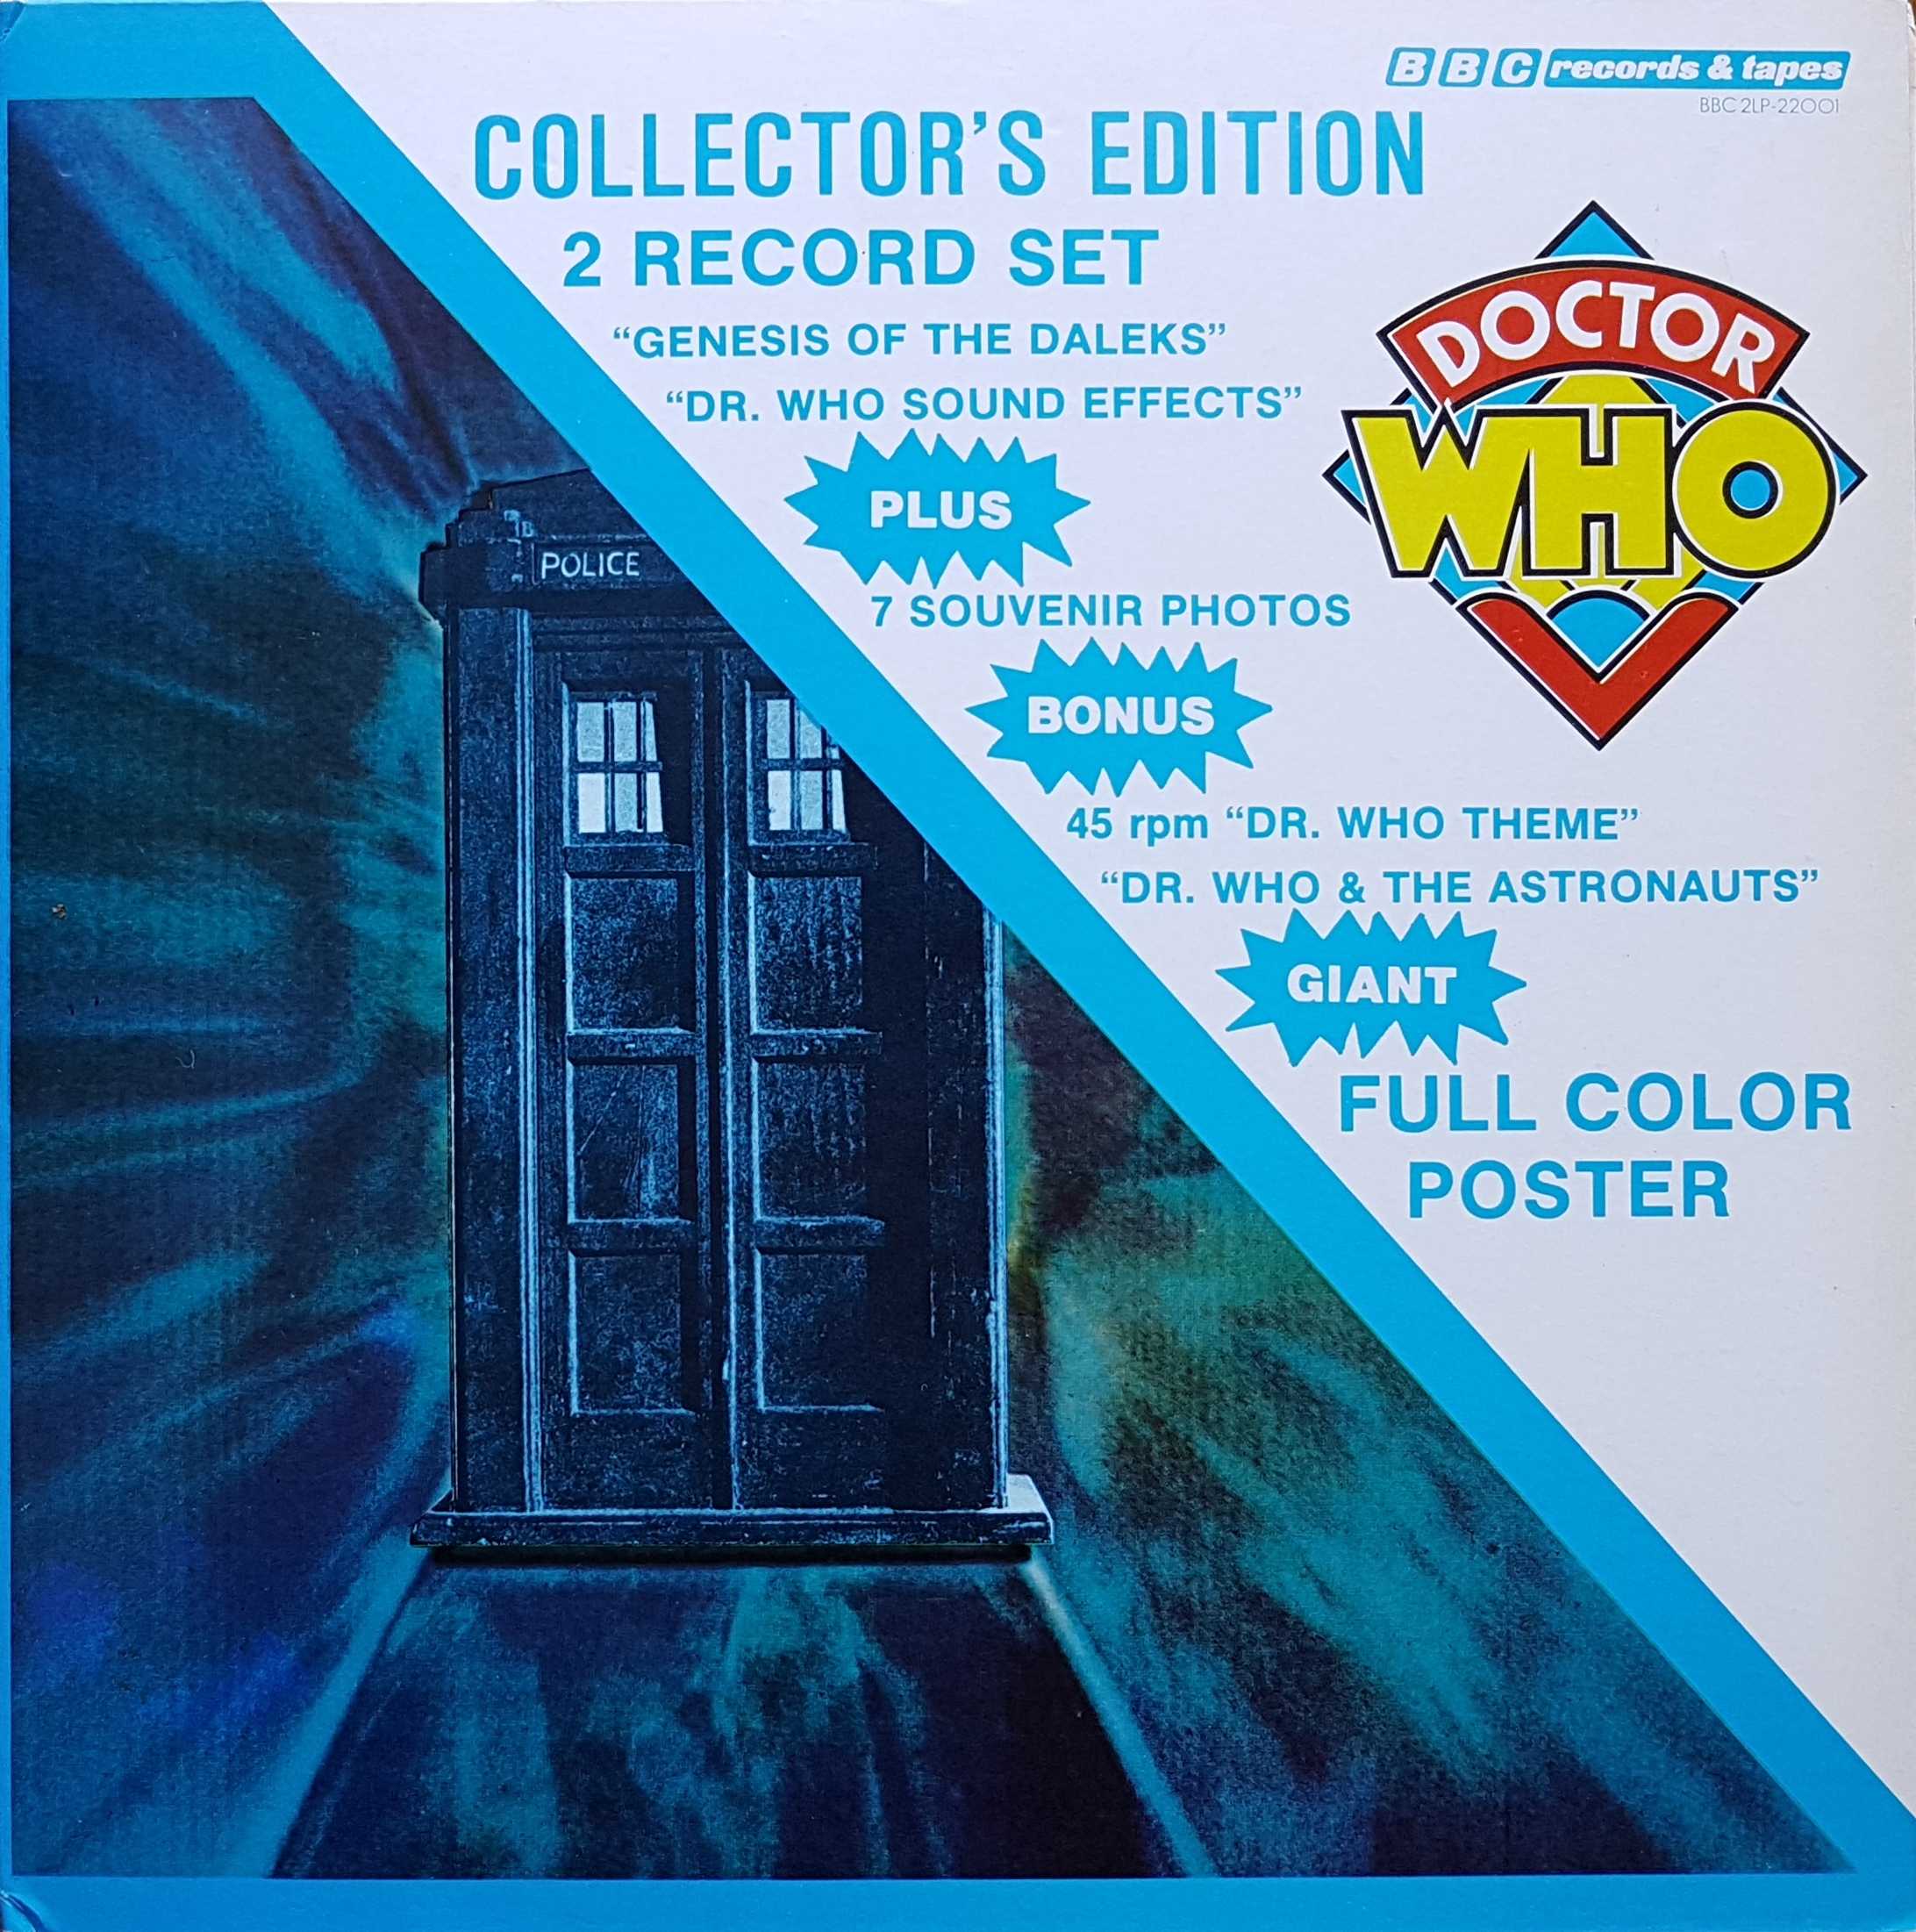 Picture of Doctor Who - Collectors edition by artist Various from the BBC albums - Records and Tapes library